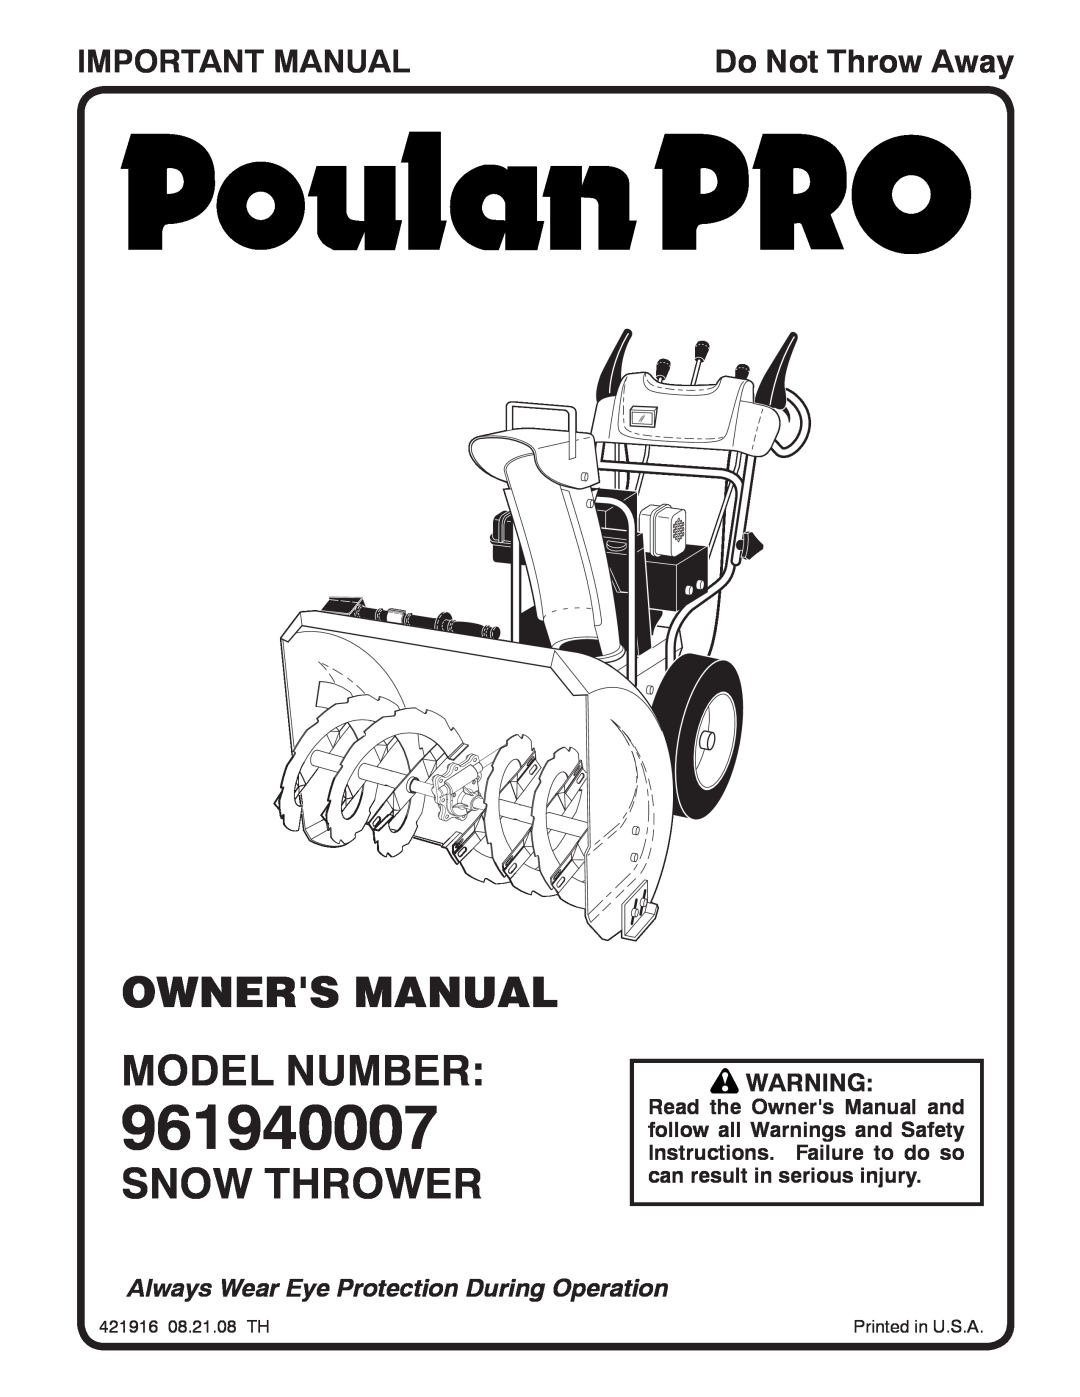 Poulan 421916 owner manual Owners Manual Model Number, Snow Thrower, Important Manual, 961940007, Do Not Throw Away 